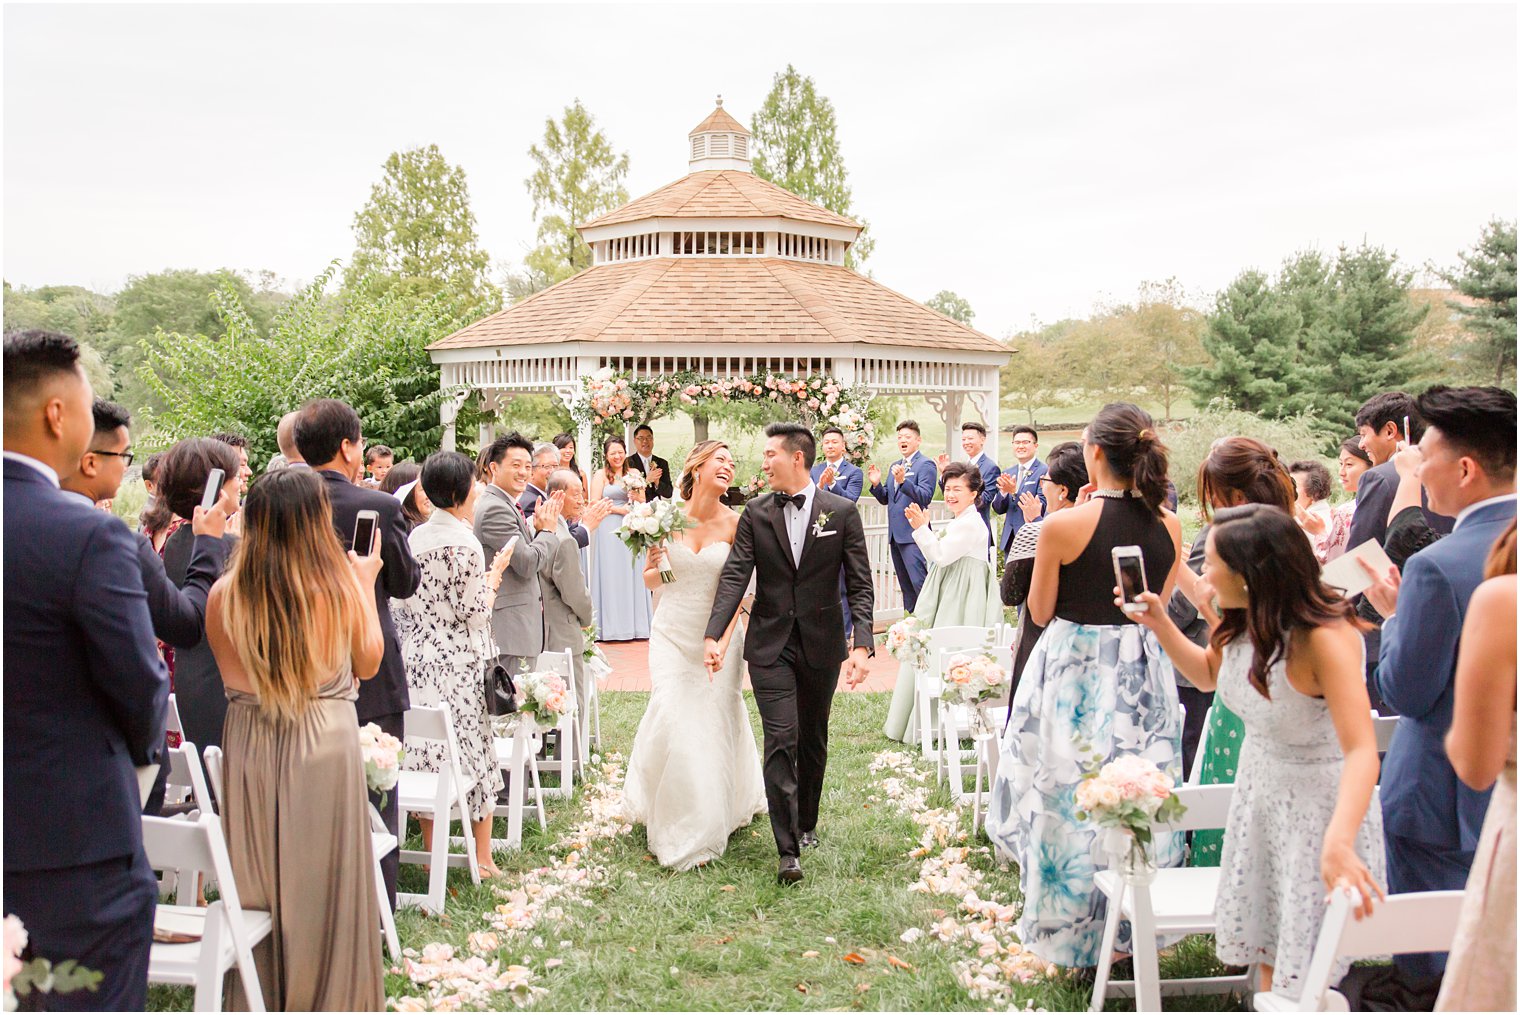 Outdoor ceremony at Chauncey Hotel in Princeton